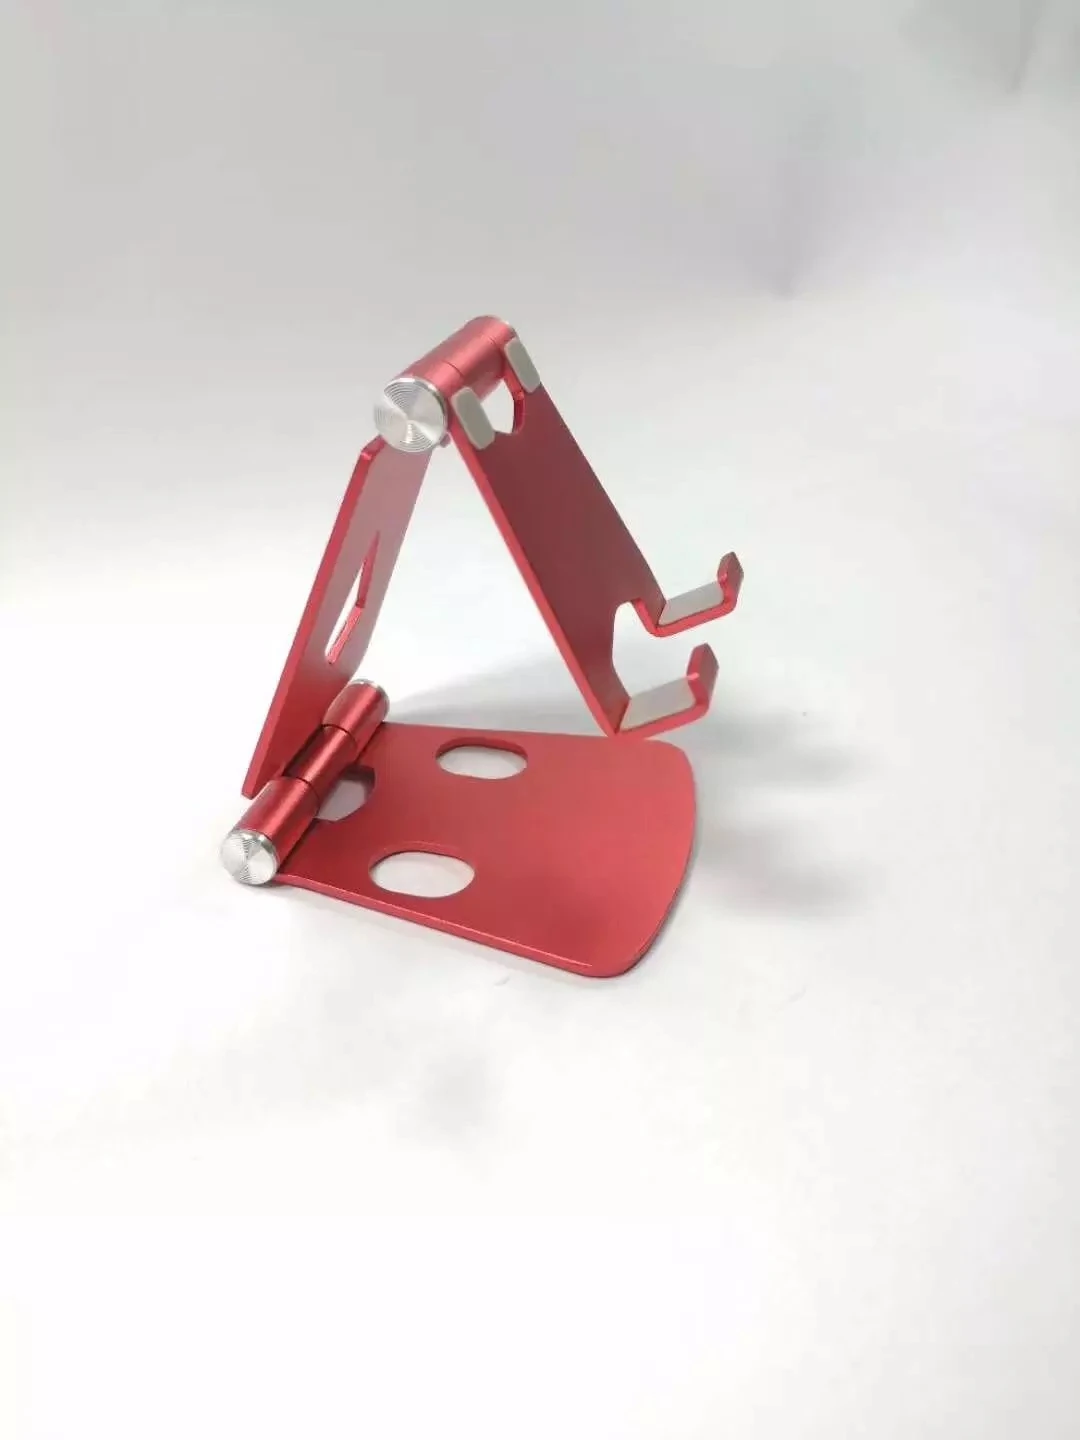 Universal Angle Adjustable Foldable Mobile Phone Desktop Stand Aluminum Alloy Tablet Cell Phone Stand Holder